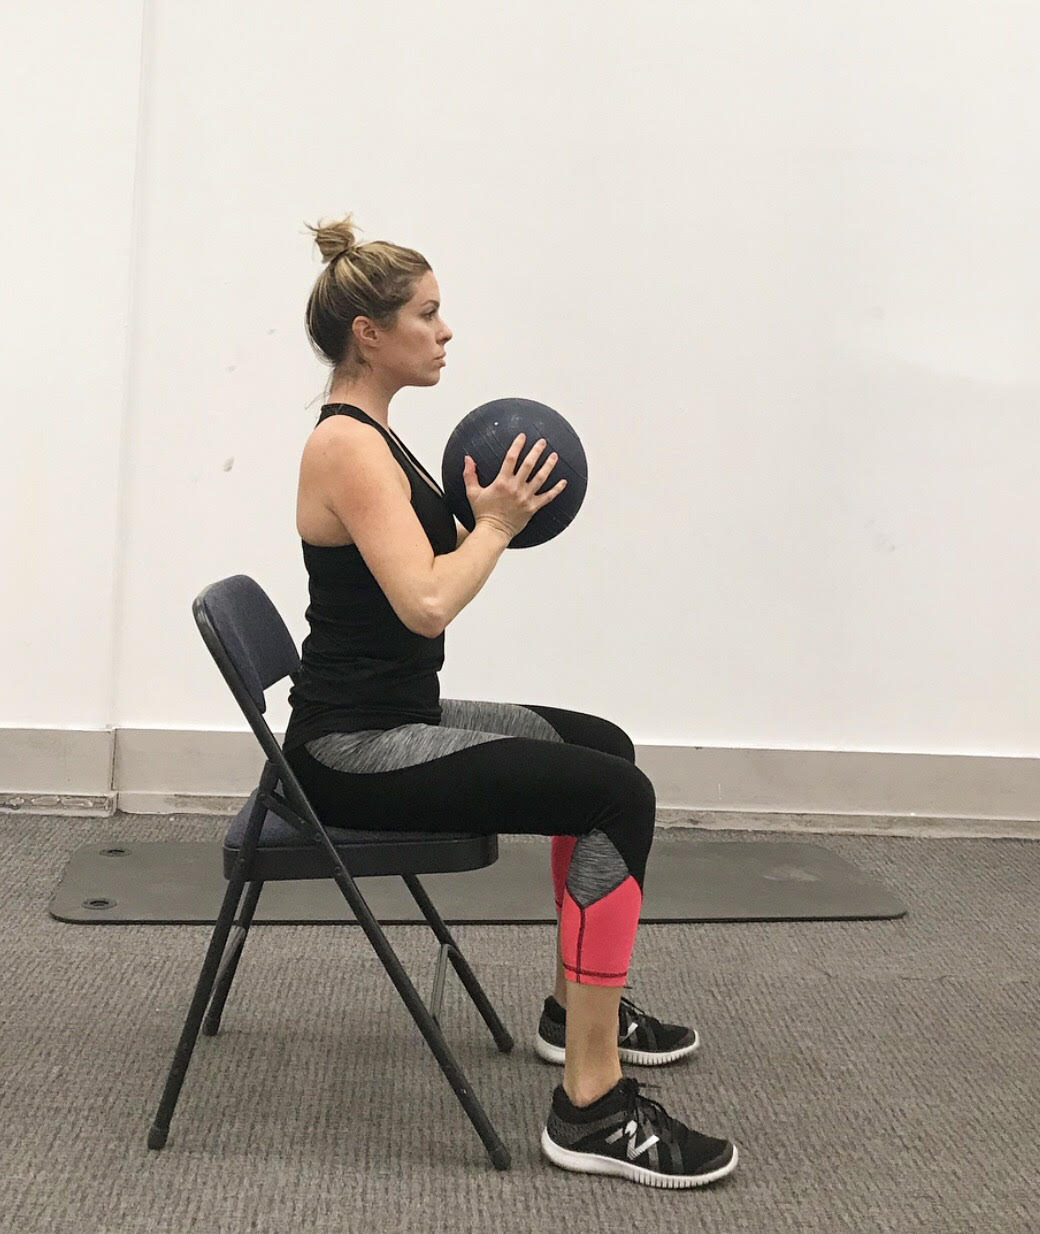 How To Get A Healthy Workout While Seated (2022) Chest Squeeze